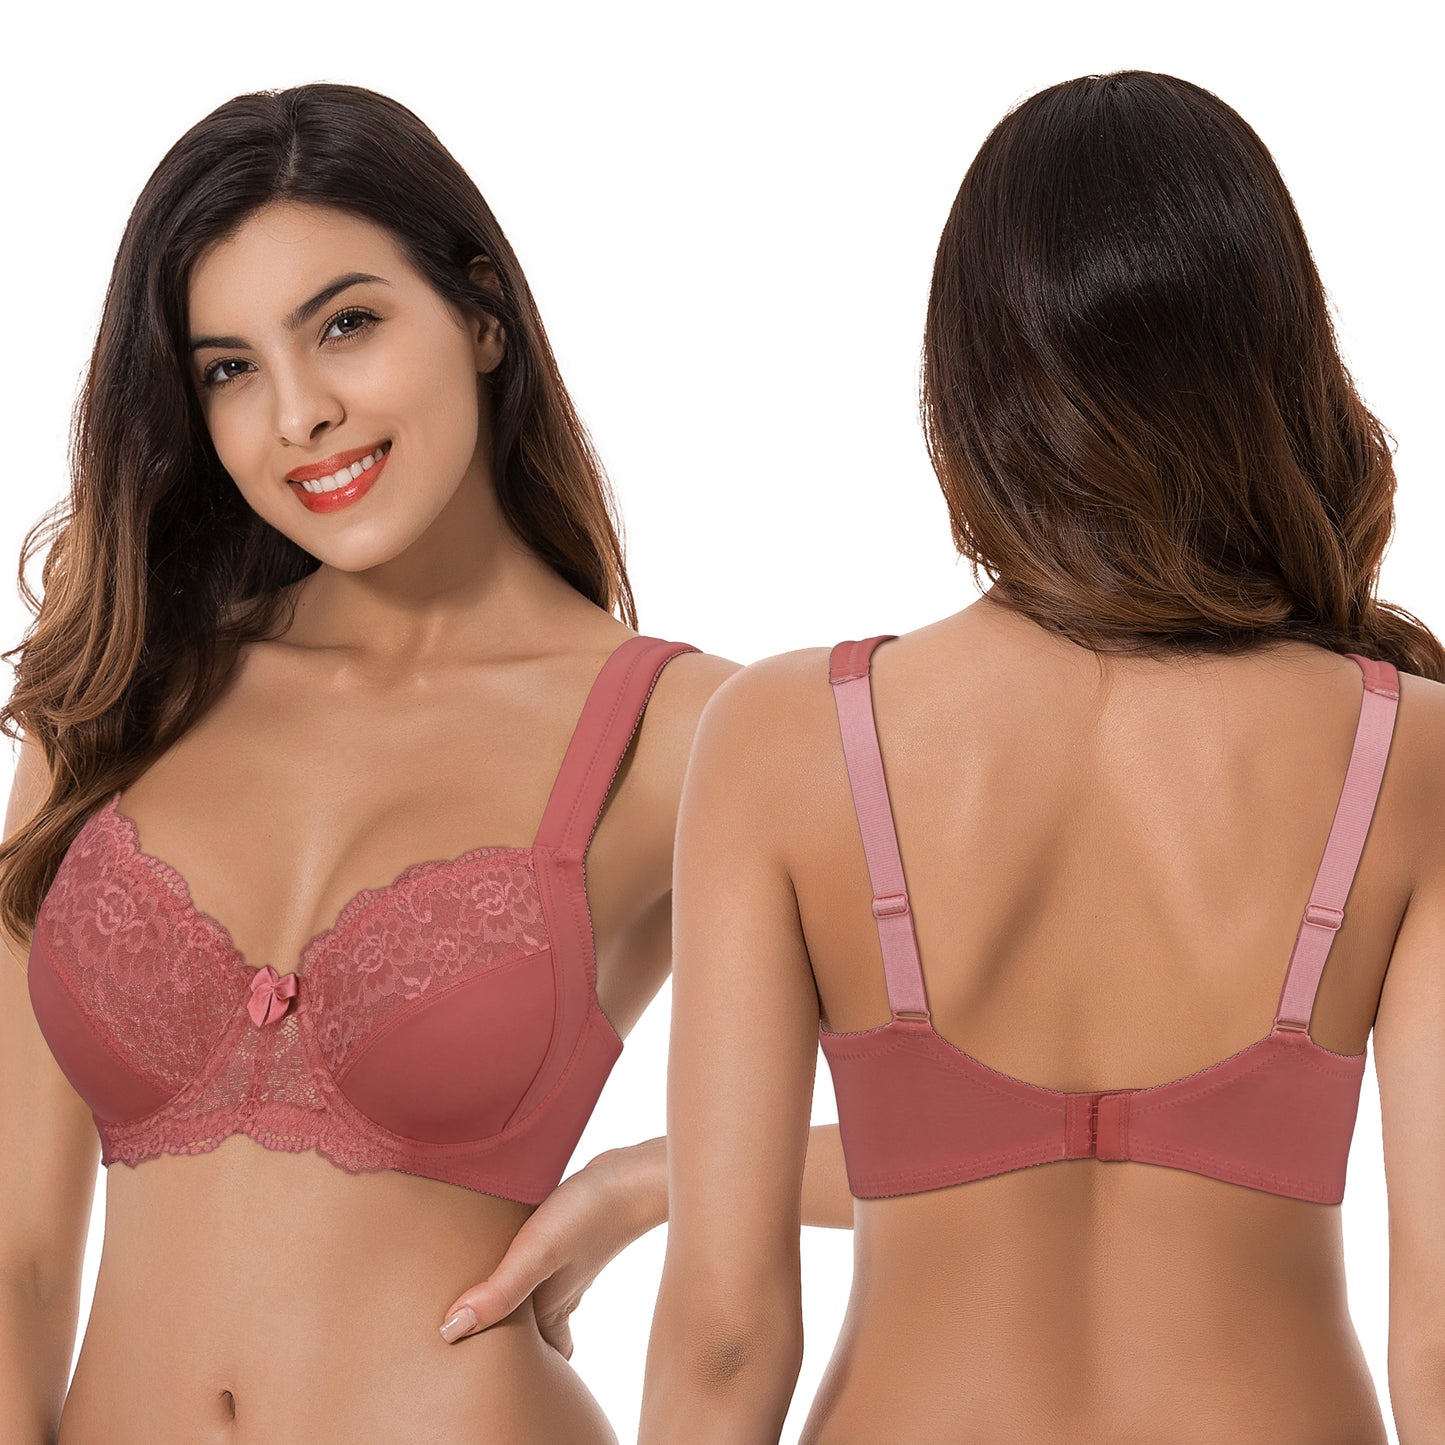 Women's Plus Size Unlined Underwire Lace Bra with Cushion Straps